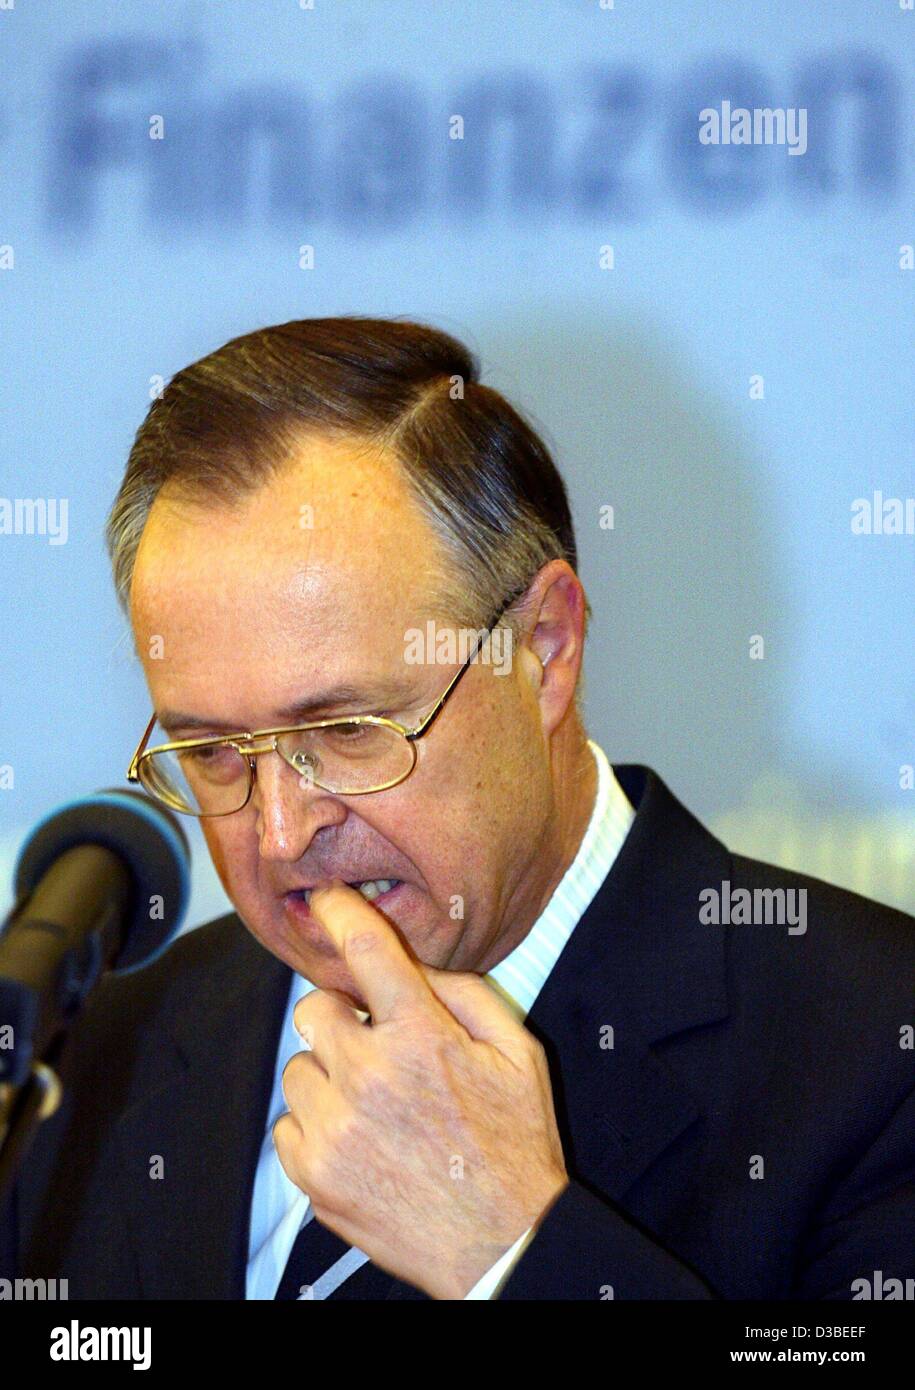 (dpa) - German Finance Minister Hans Eichel of the Social Democratic Party (SPD) pictured with a contemplative gesture at a press conference on the conclusion of the budget for 2002 in Berlin, 14 January 2003. The planned new indebtedness of 18.9 billion Euro will be sufficient for 2003. It will not Stock Photo